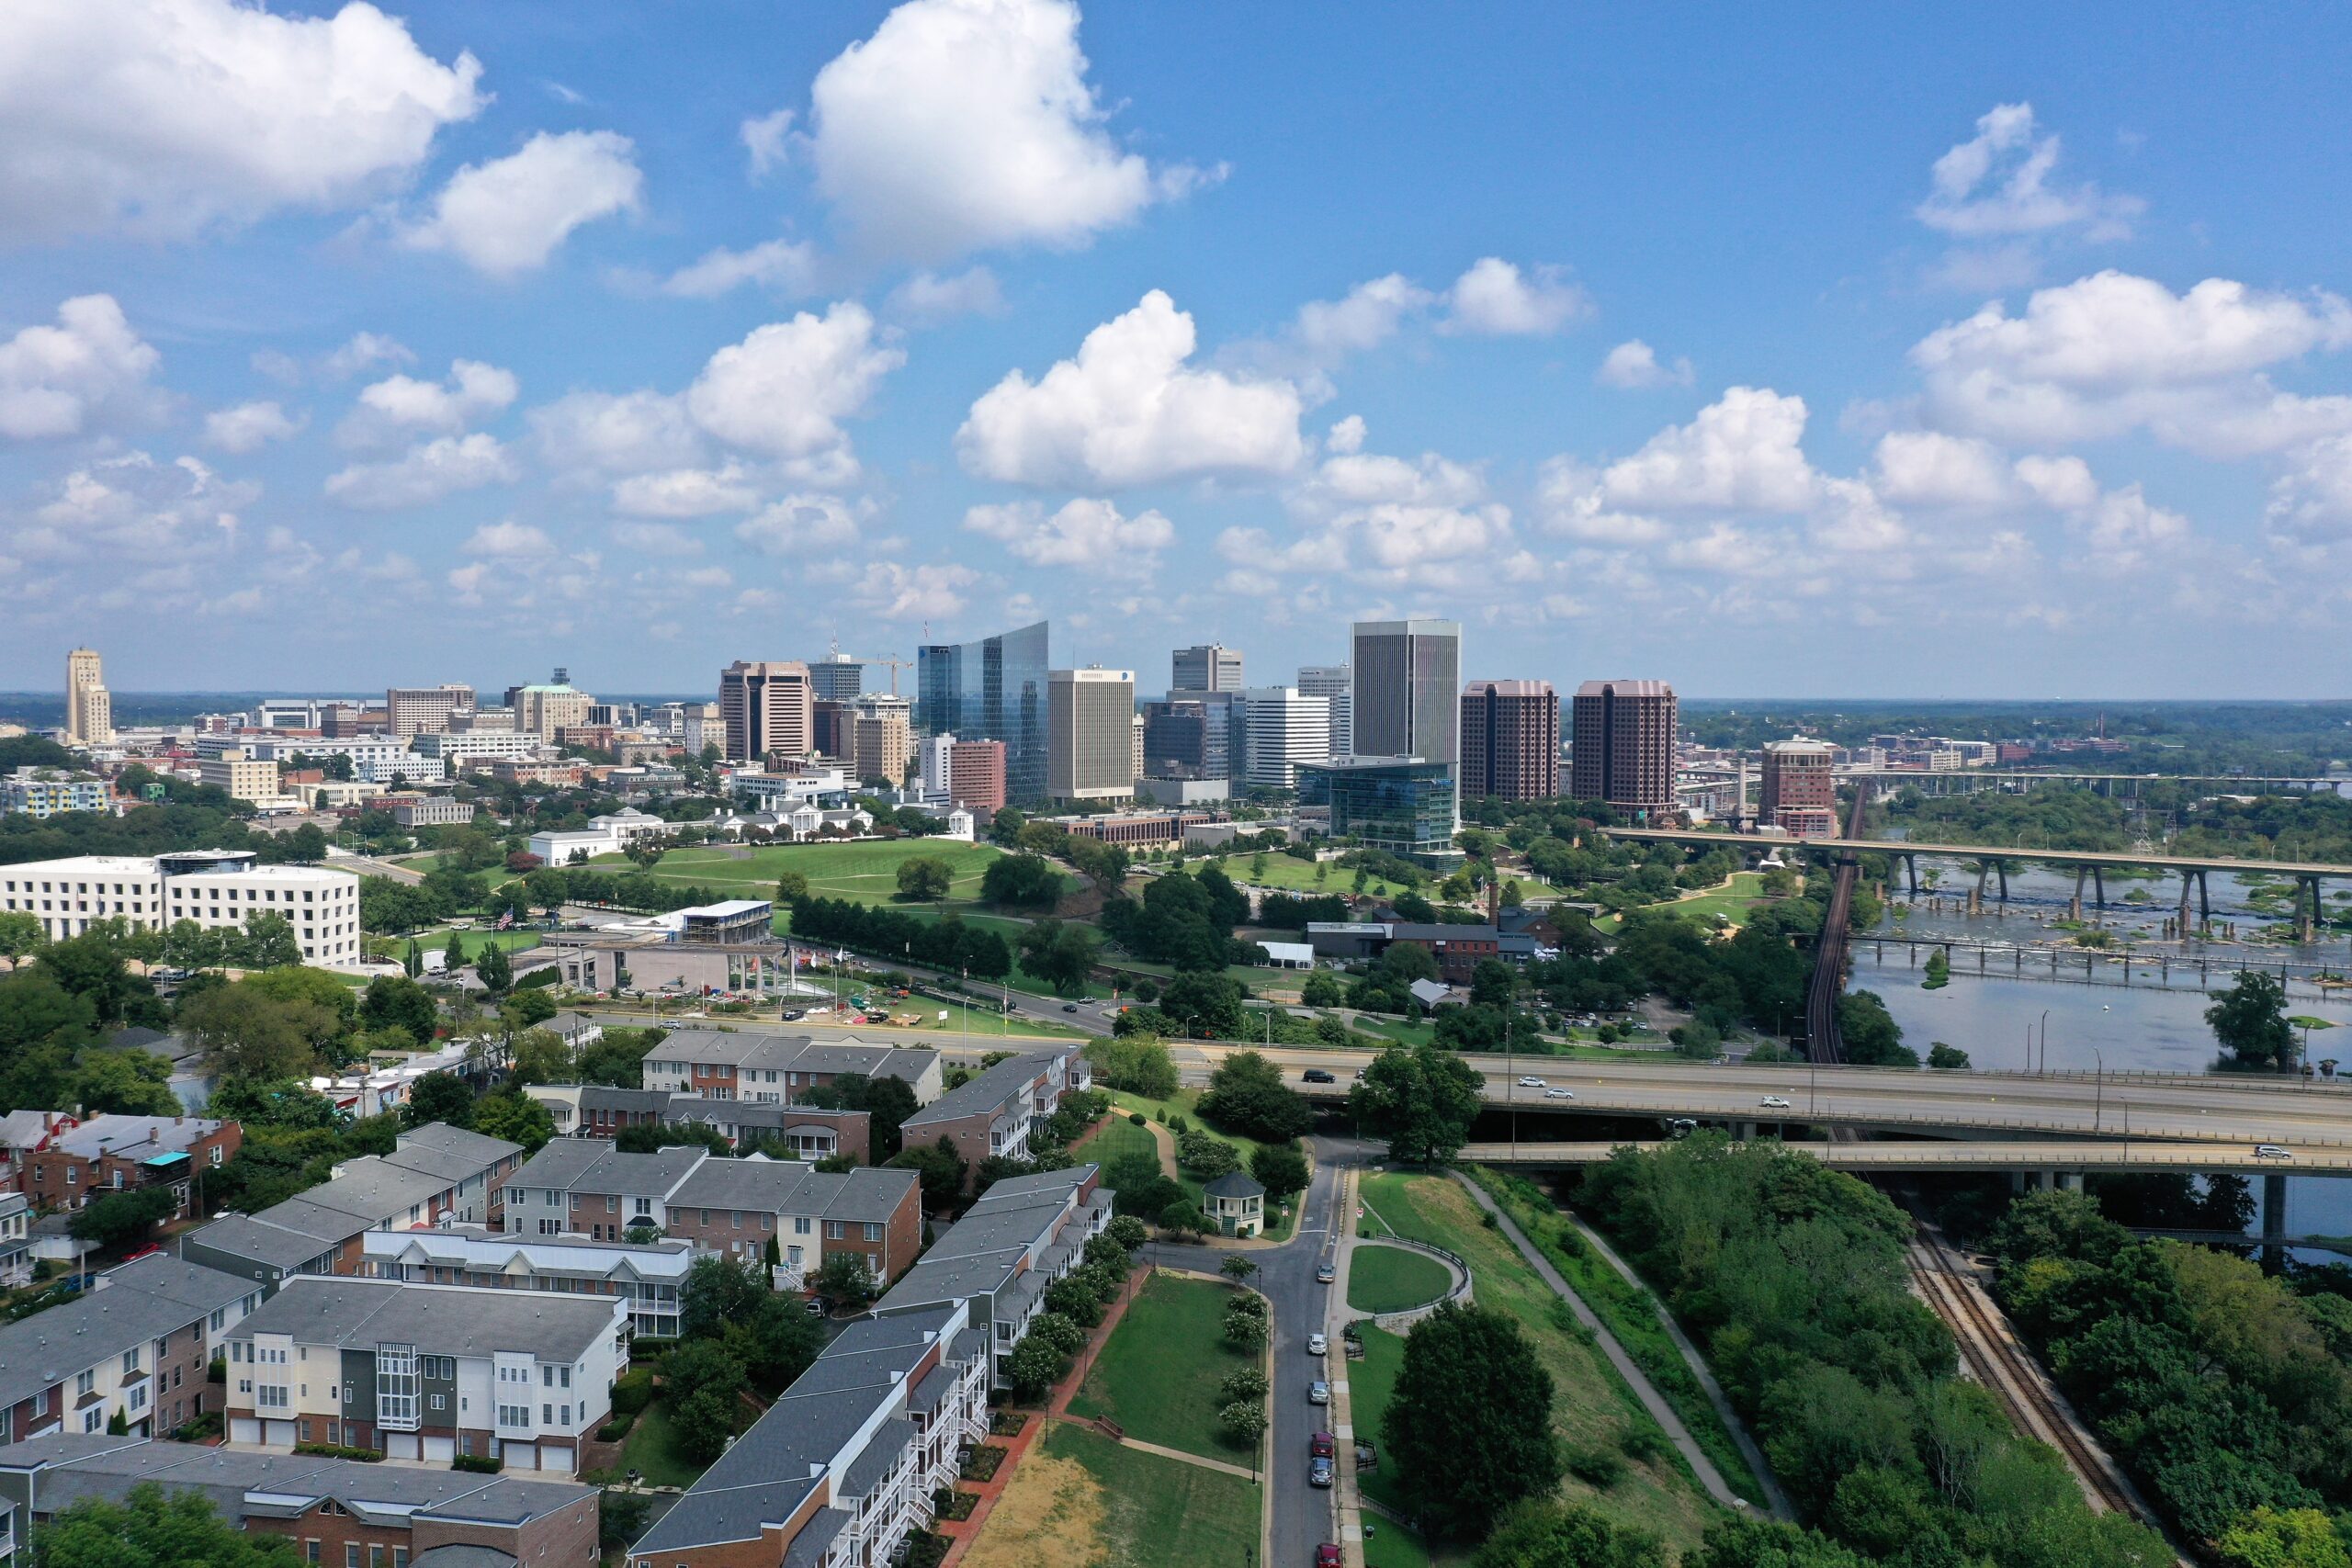 A beautiful shot of Richmond, Virginia skyline with a cloudy blue sky in the background